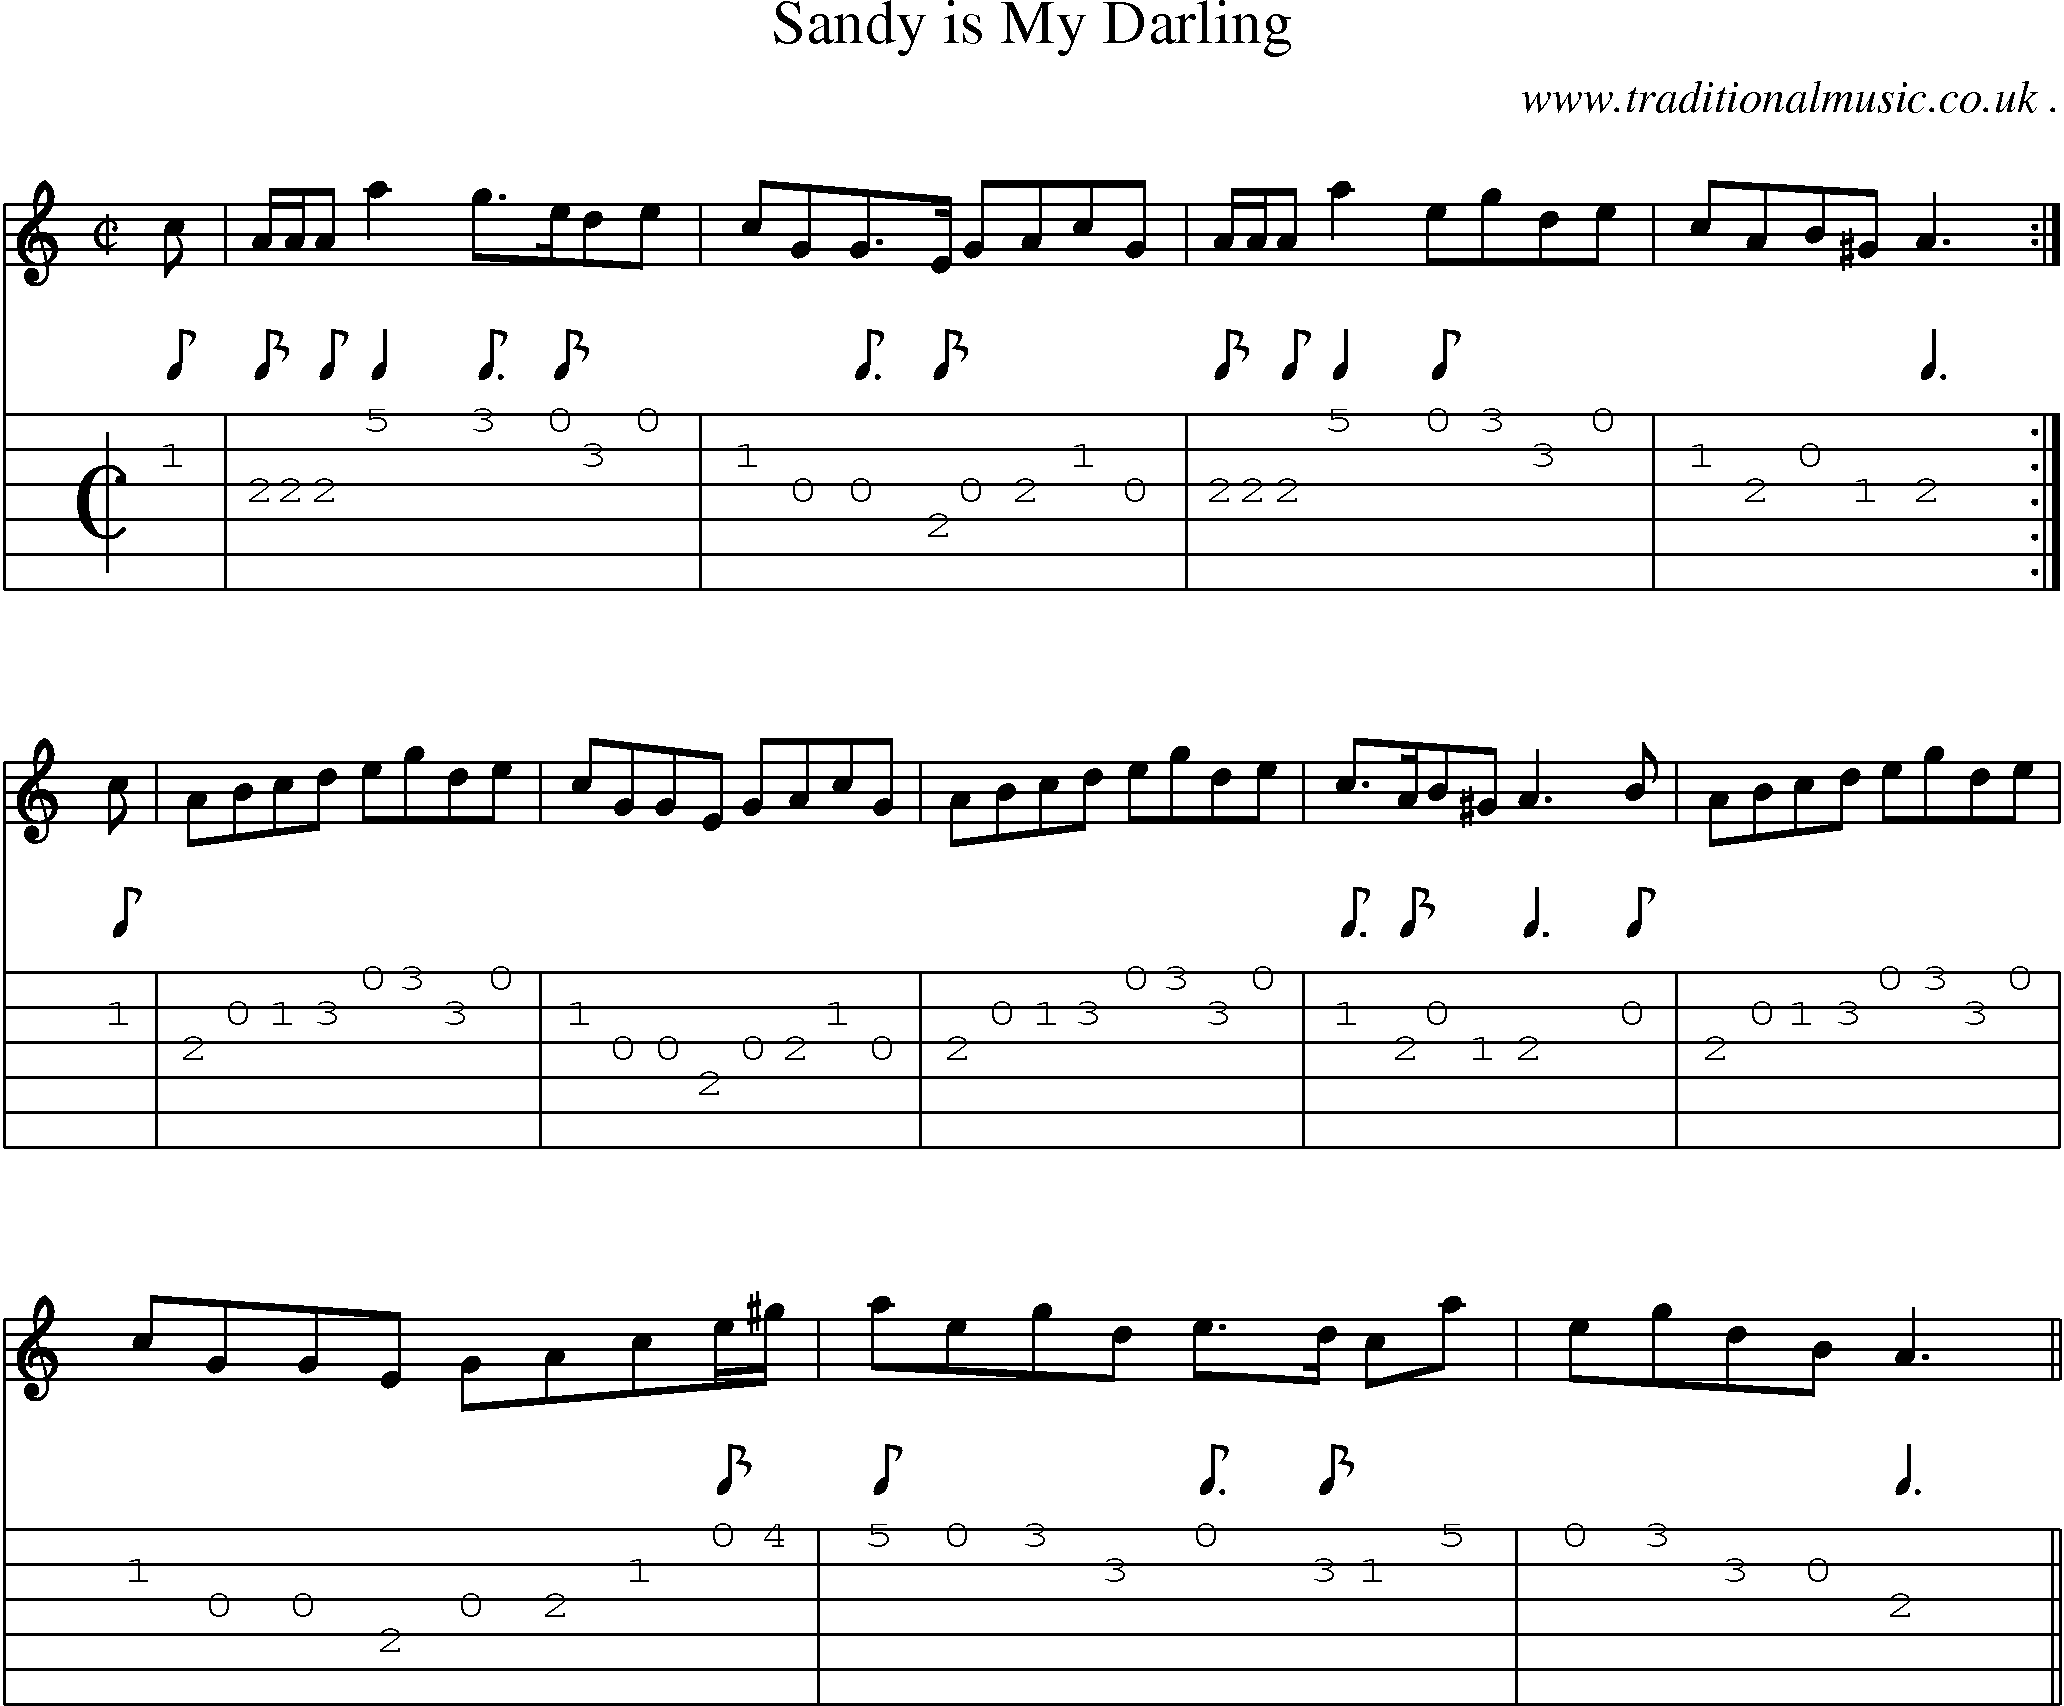 Sheet-music  score, Chords and Guitar Tabs for Sandy Is My Darling